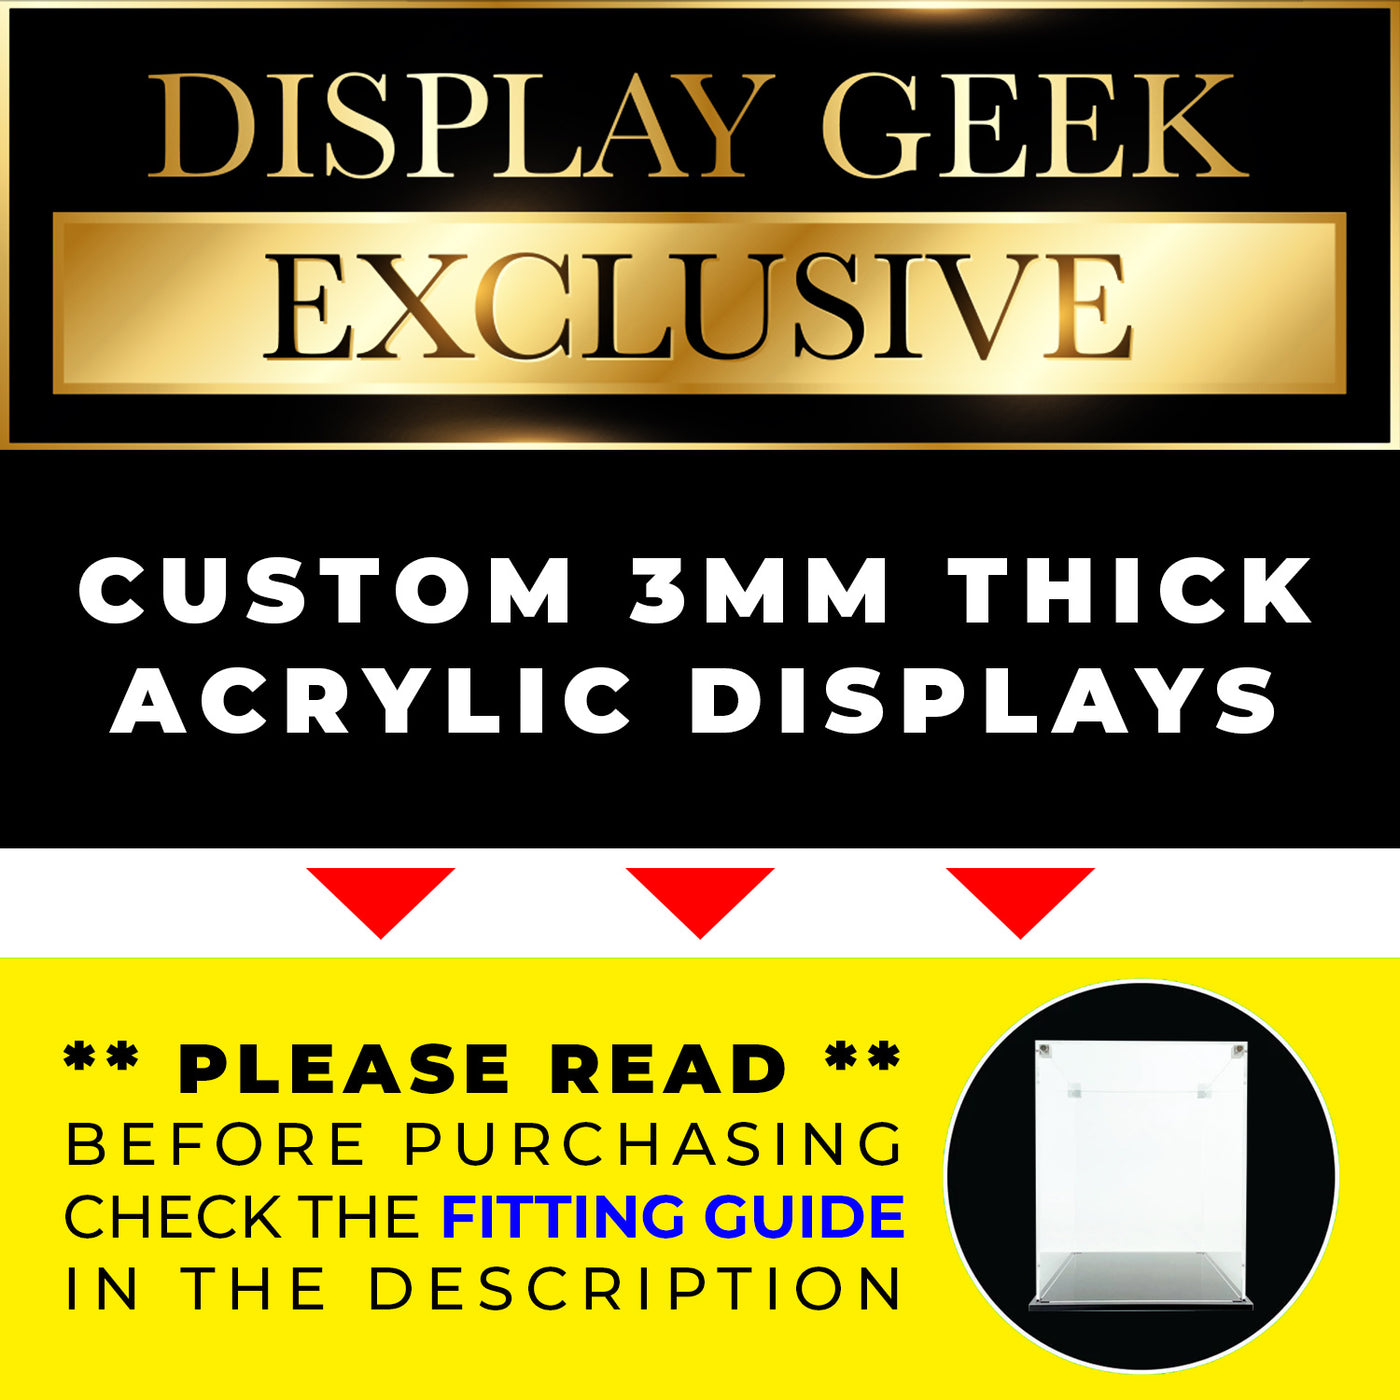 4 PACK WIDE Custom Acrylic Display Case for Funko Pop Grails 6.25h x 15.75w x 3.5d